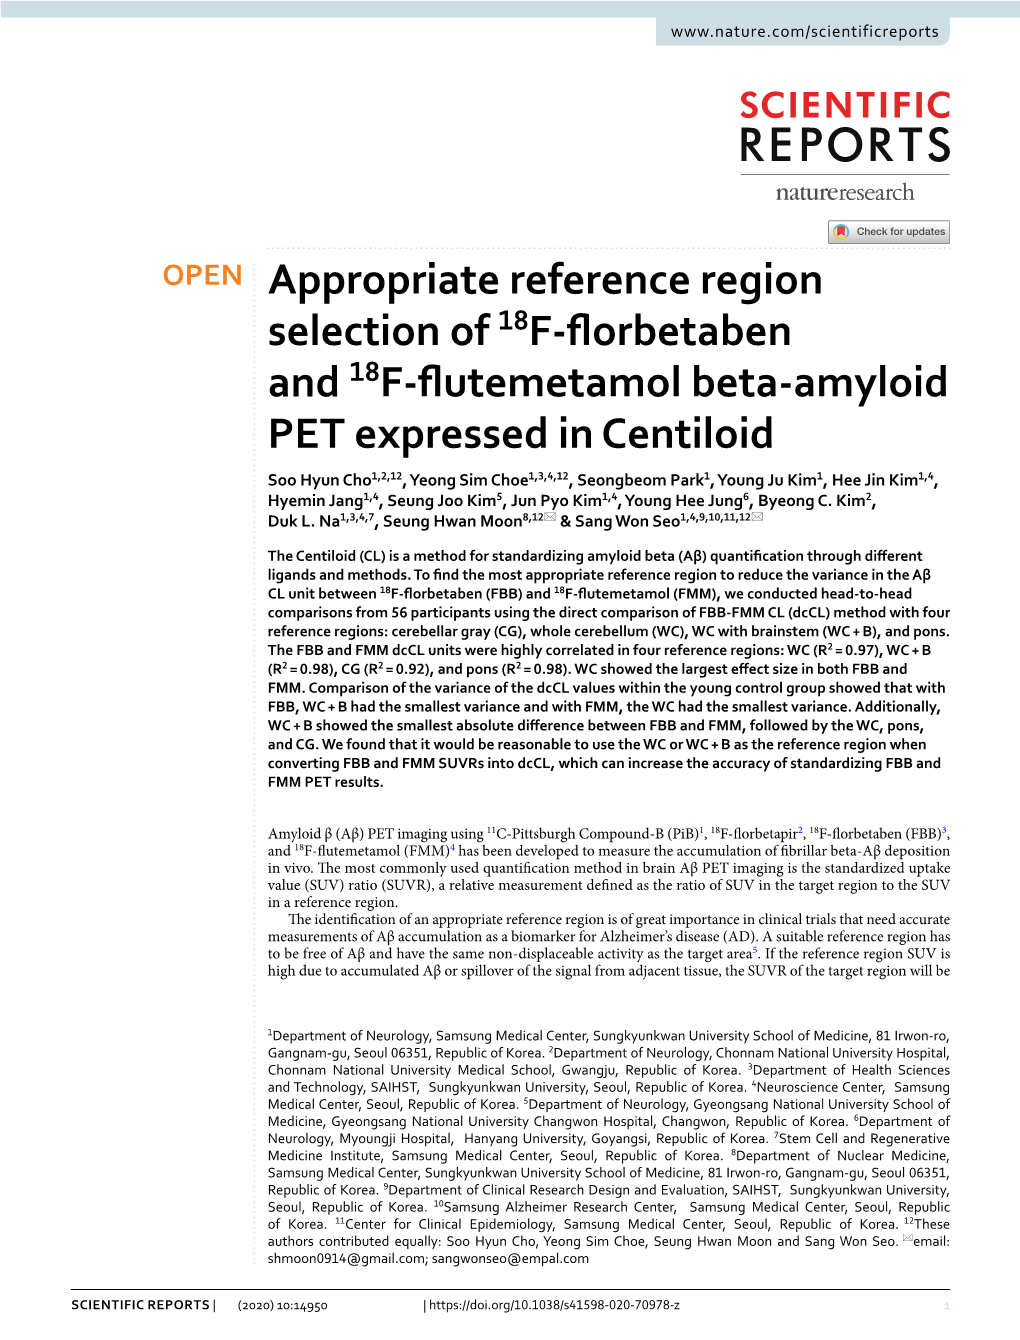 Appropriate Reference Region Selection of 18F-Florbetaben and 18F